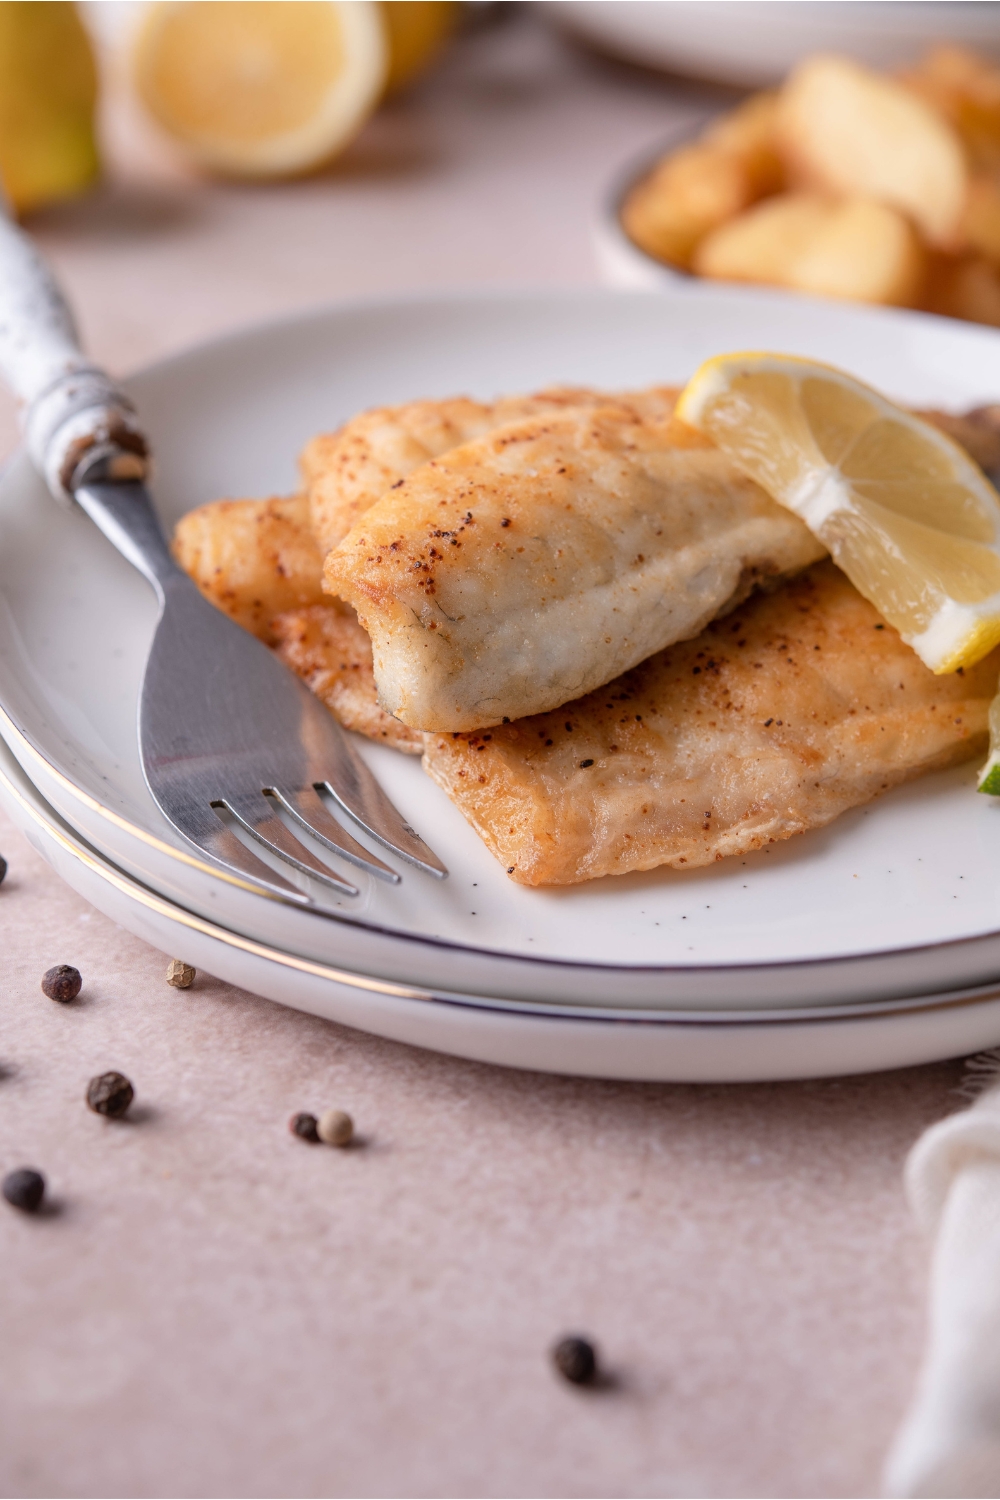 Two pan-fried tilapia fillets plated on top of each other with a slice of lemon on the fish. There is a fork on the plate and a second white plate under the plate of fish.